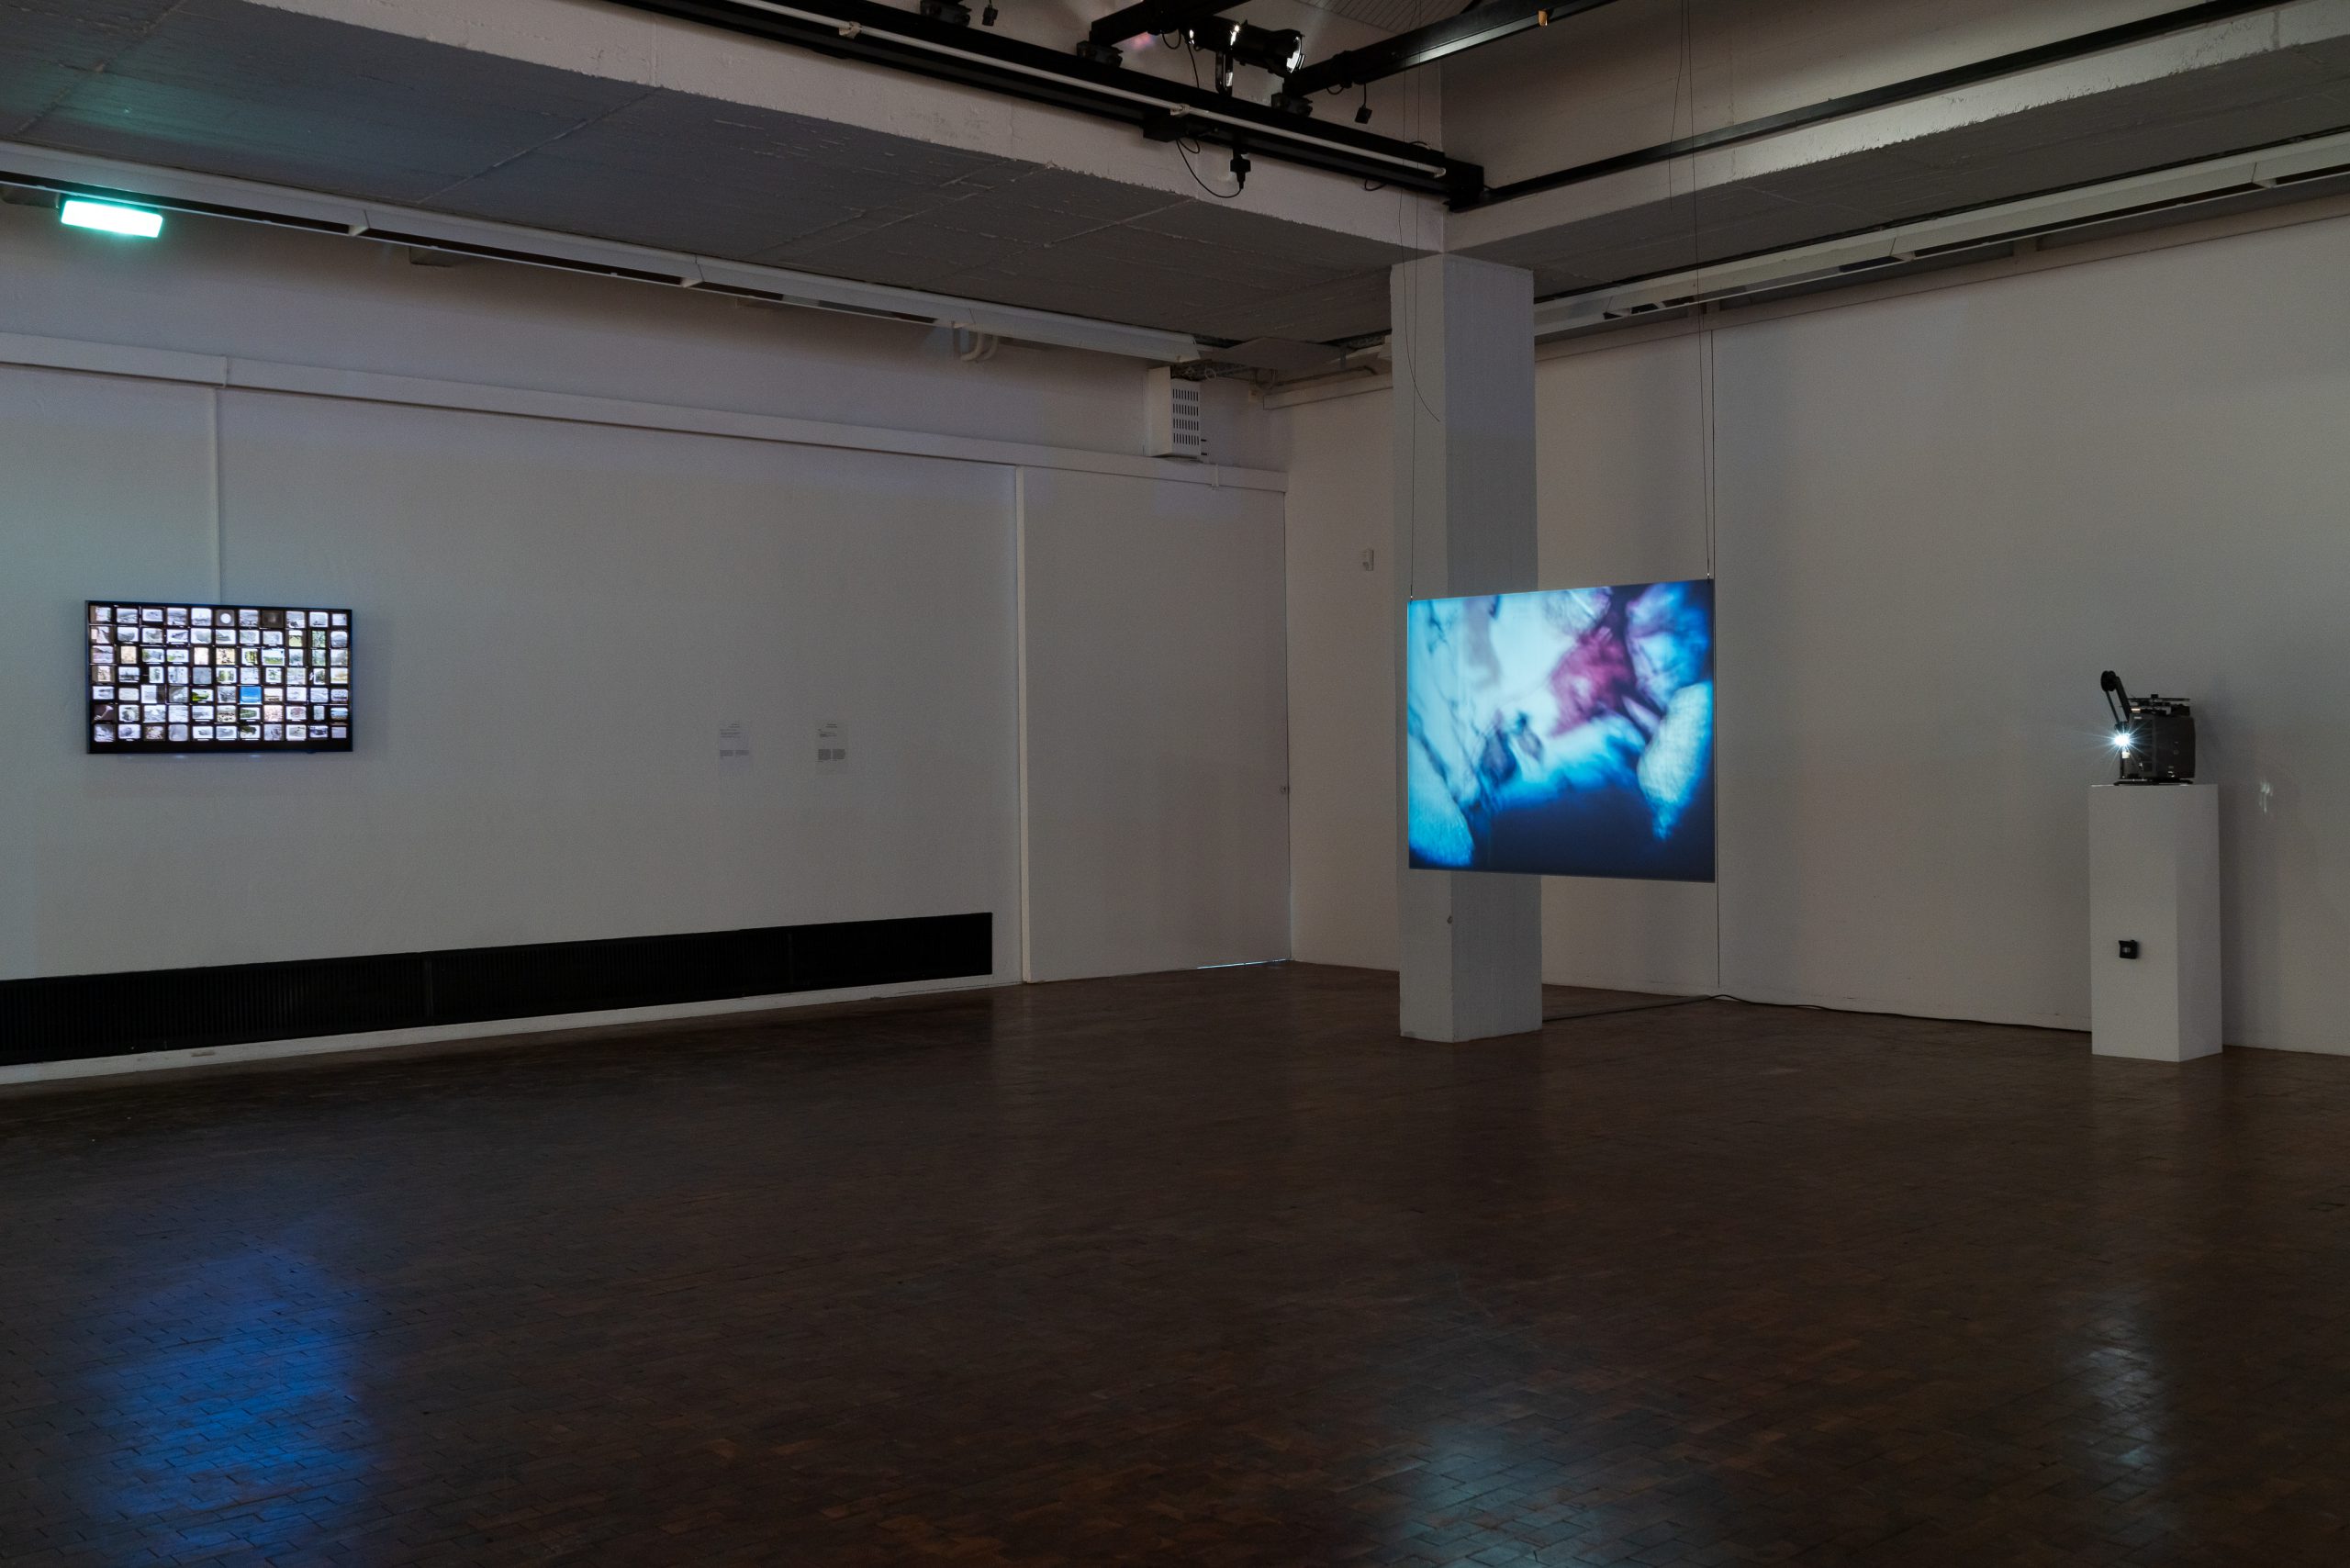 Dana Levy, Clément Cogitore, installation view, 12th Berlin Biennale, Akademie der Künste, Hanseatenweg, 11.6.–18.9.2022
Photo: dotgain.info

From left to right:

Dana Levy, History Lessons, 2022
50’’ LED screen with 77 antique magica lantern slides mounted on the screen; video, loop, 4′

Clément Cogitore, Lascaux, 2017
16mm film, color, loop, 4′′